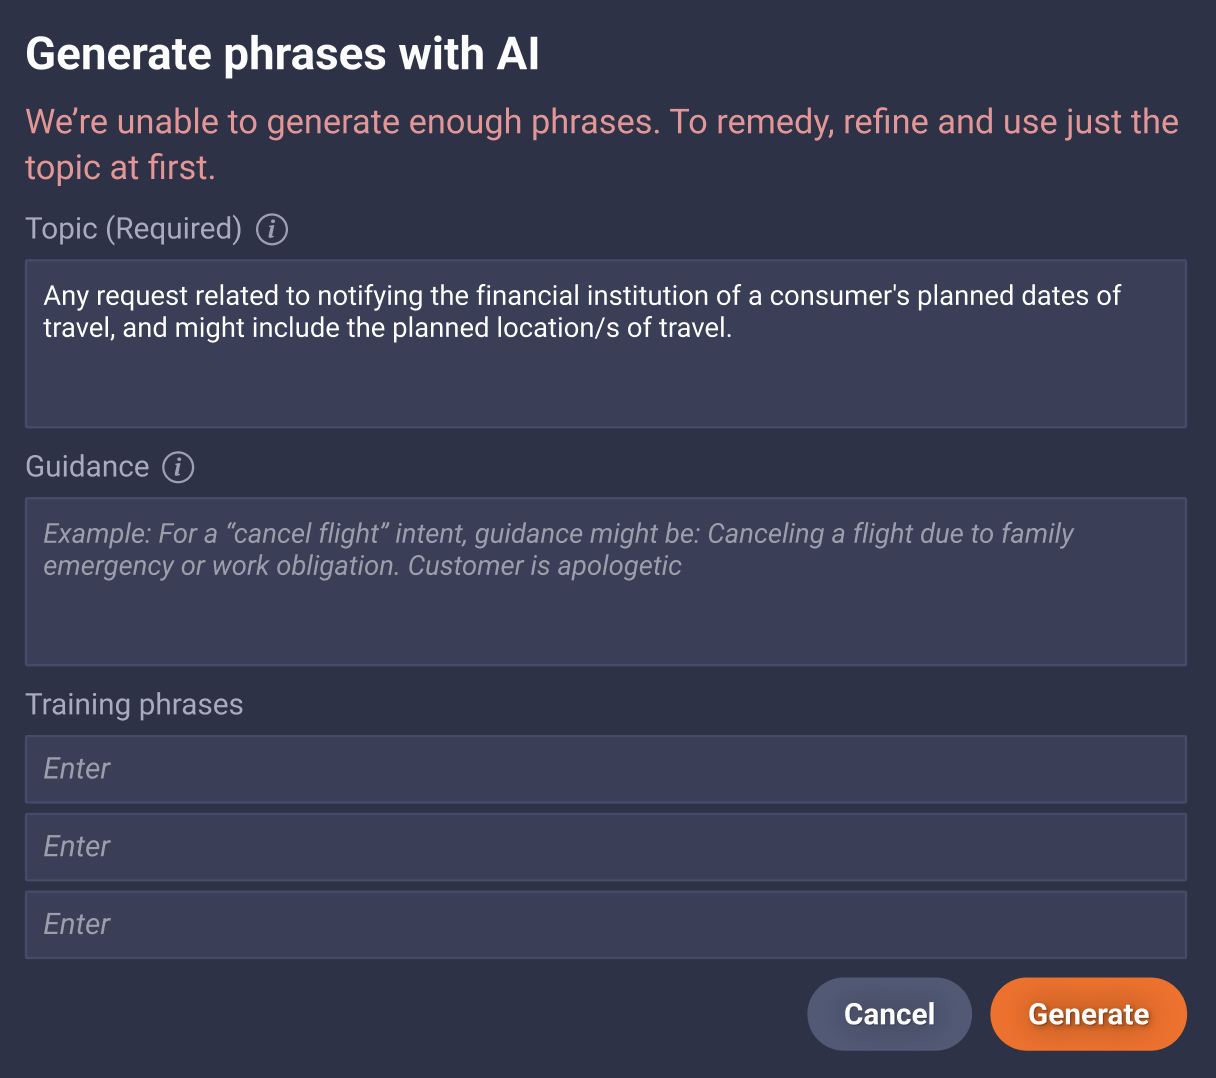 The Generate phrases with AI dialog showing three fields at the bottom for entering example phrases